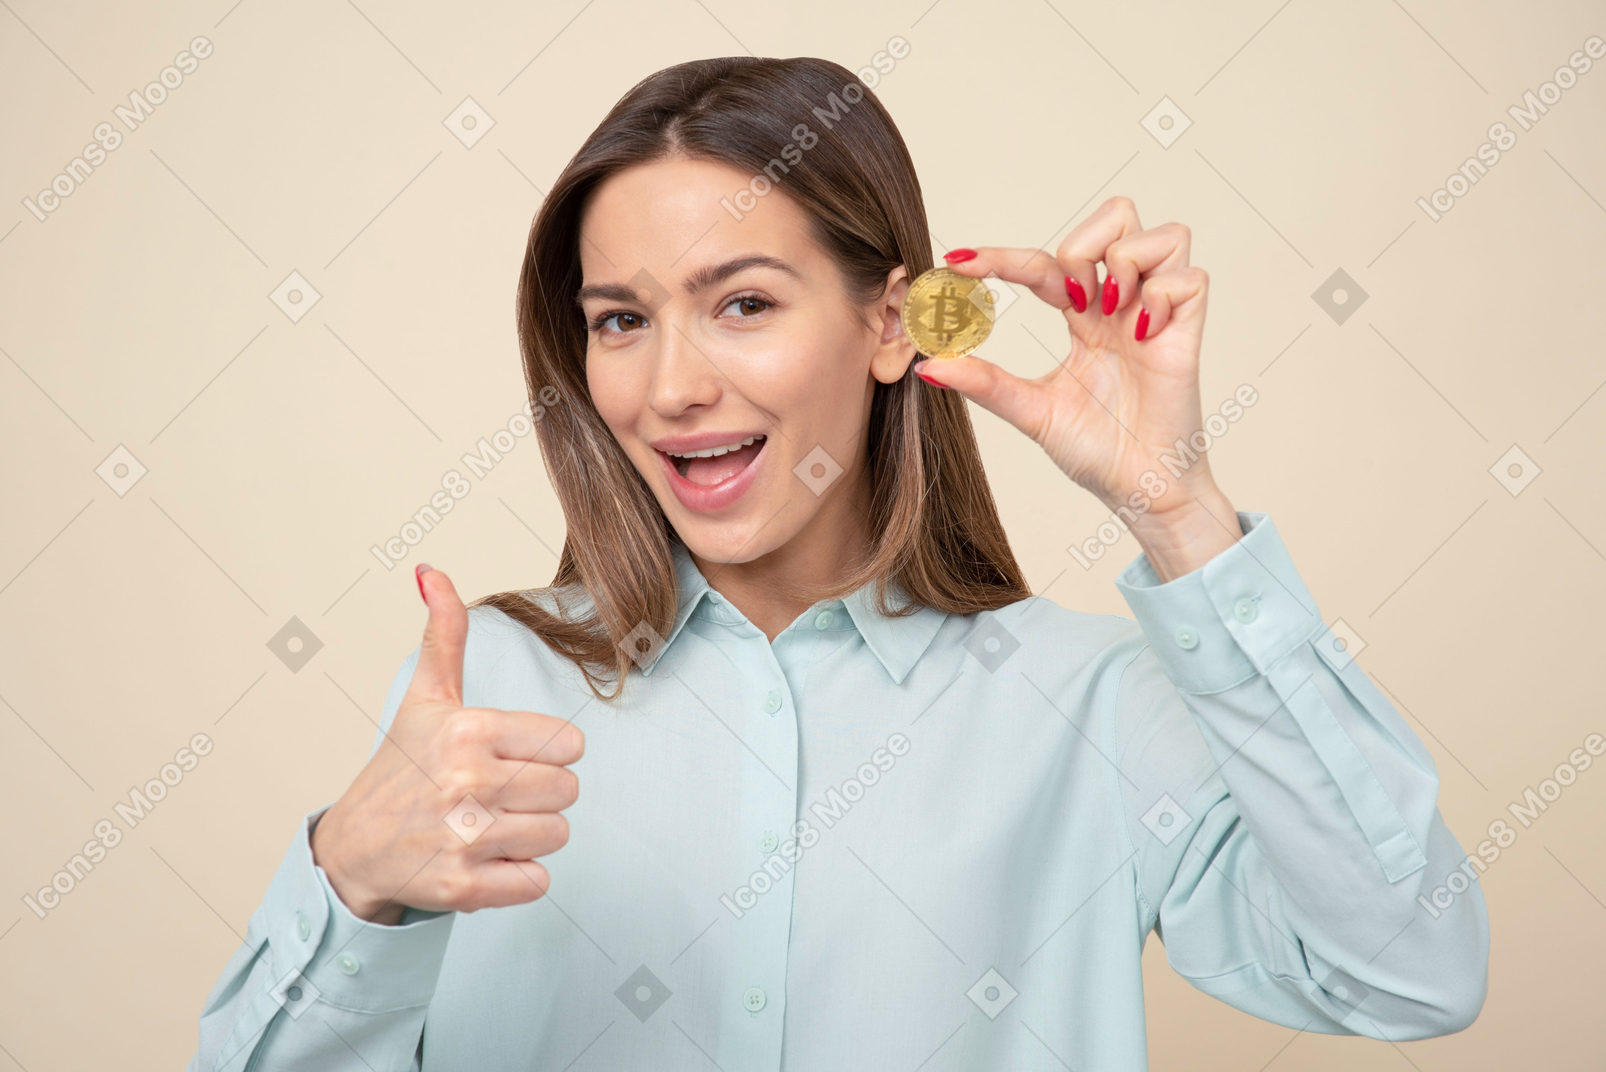 Attractive young girl showing a bitcoin and thumbs up